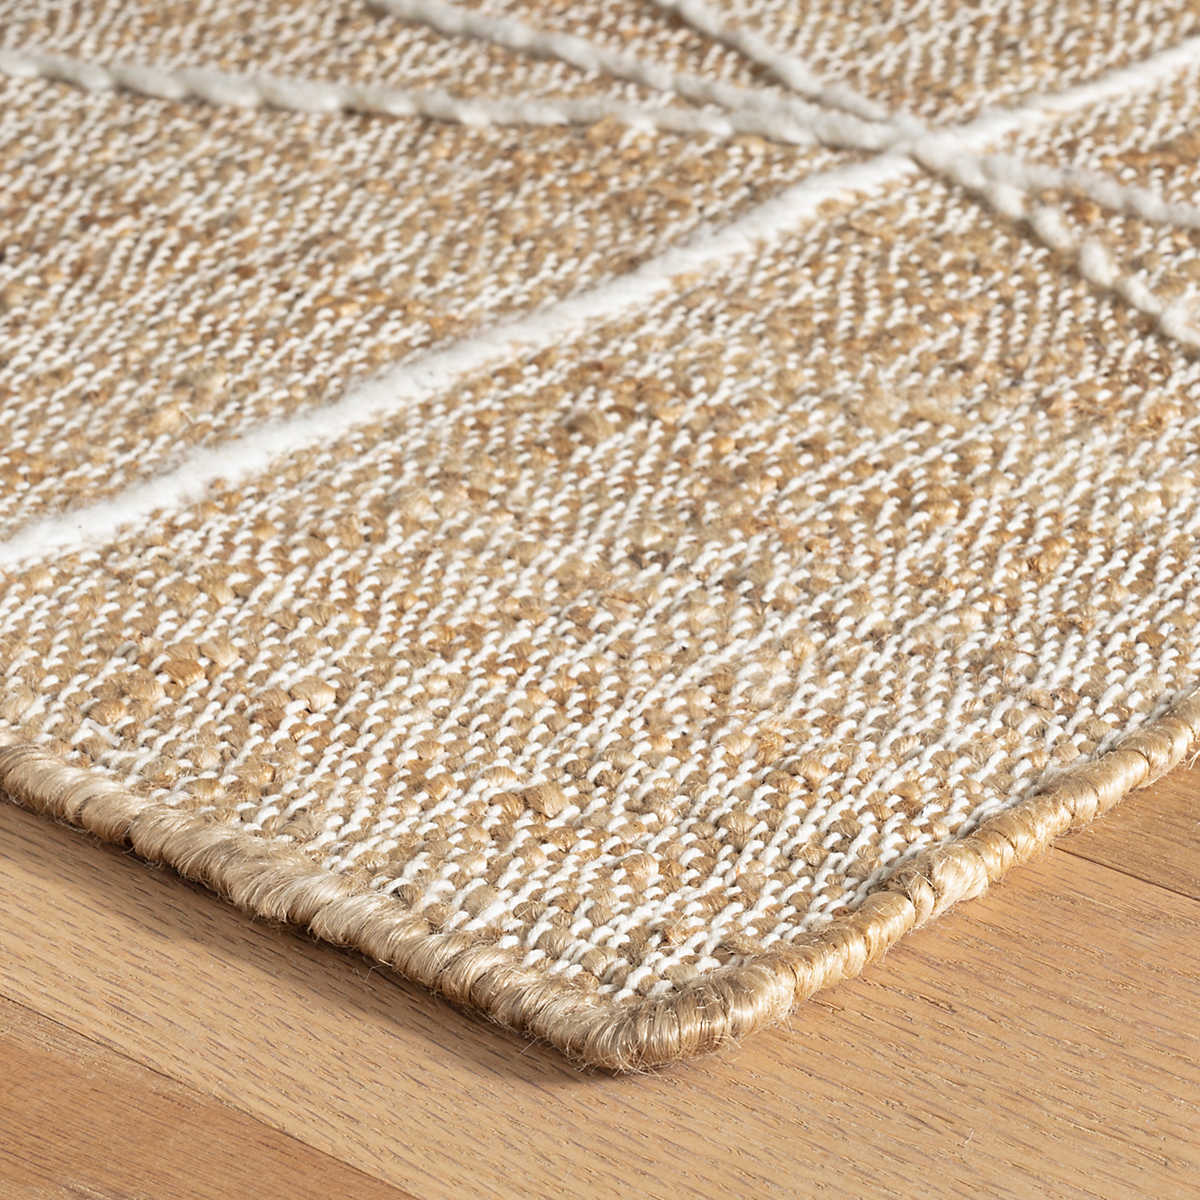 The Judson Natural/Ivory gorgeous flatwoven rug, hand-loomed from slubby, naturally colored jute makes a bold and sustainable statement that's punctuated with a random, large-scale geometry of cotton embroidery. Amethyst Home provides interior design services, furniture, rugs, and lighting in the Monterey metro area.